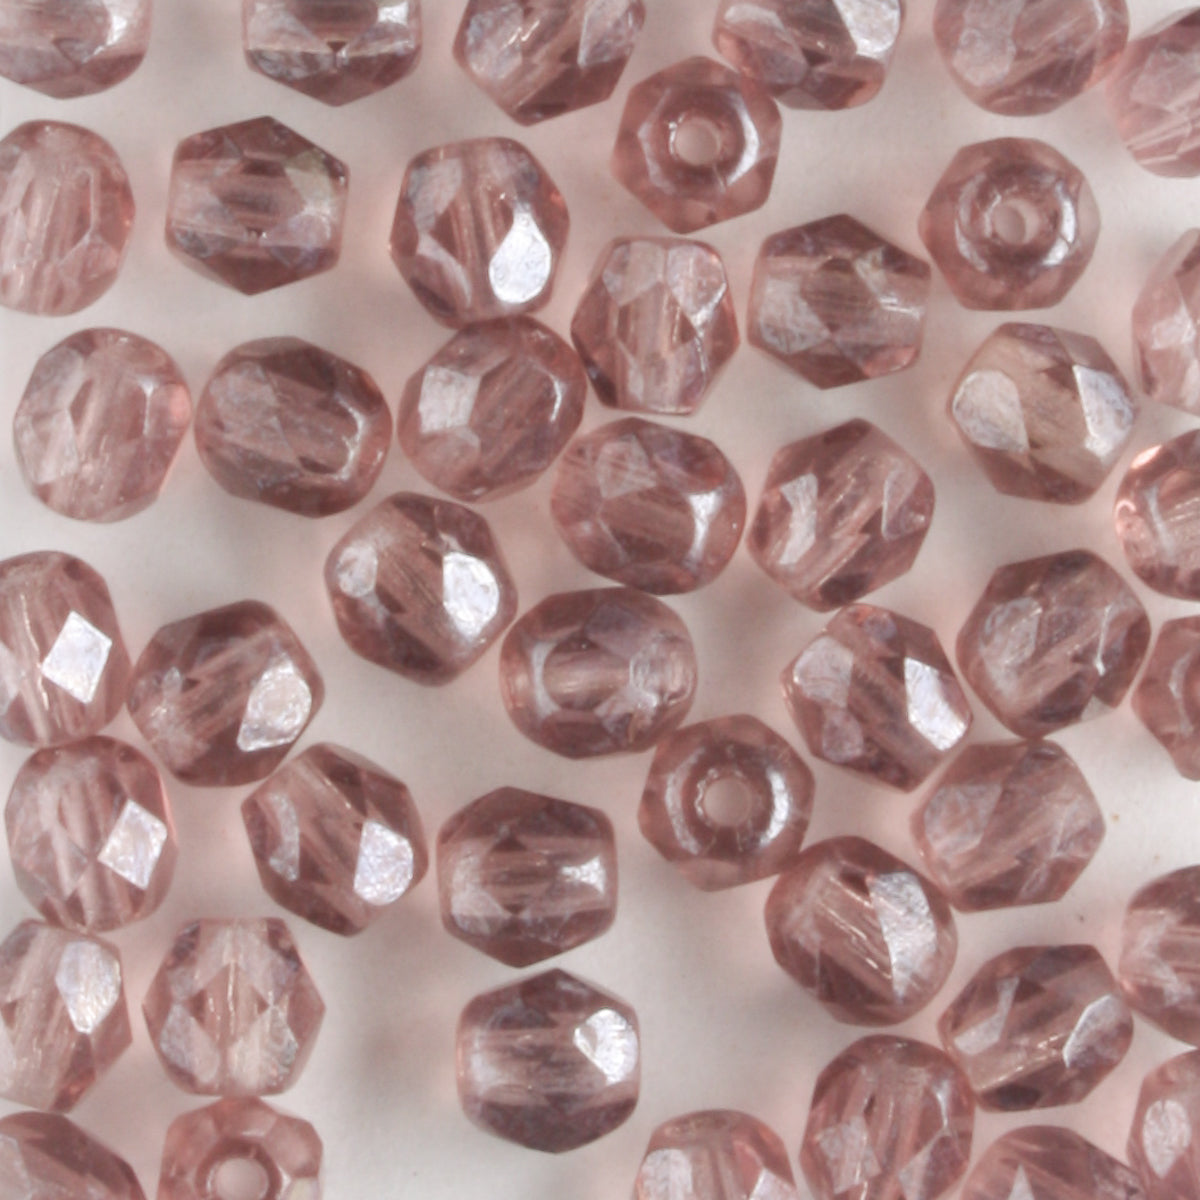 4mm Round Fire Polish Amethyst Luster - 100 beads